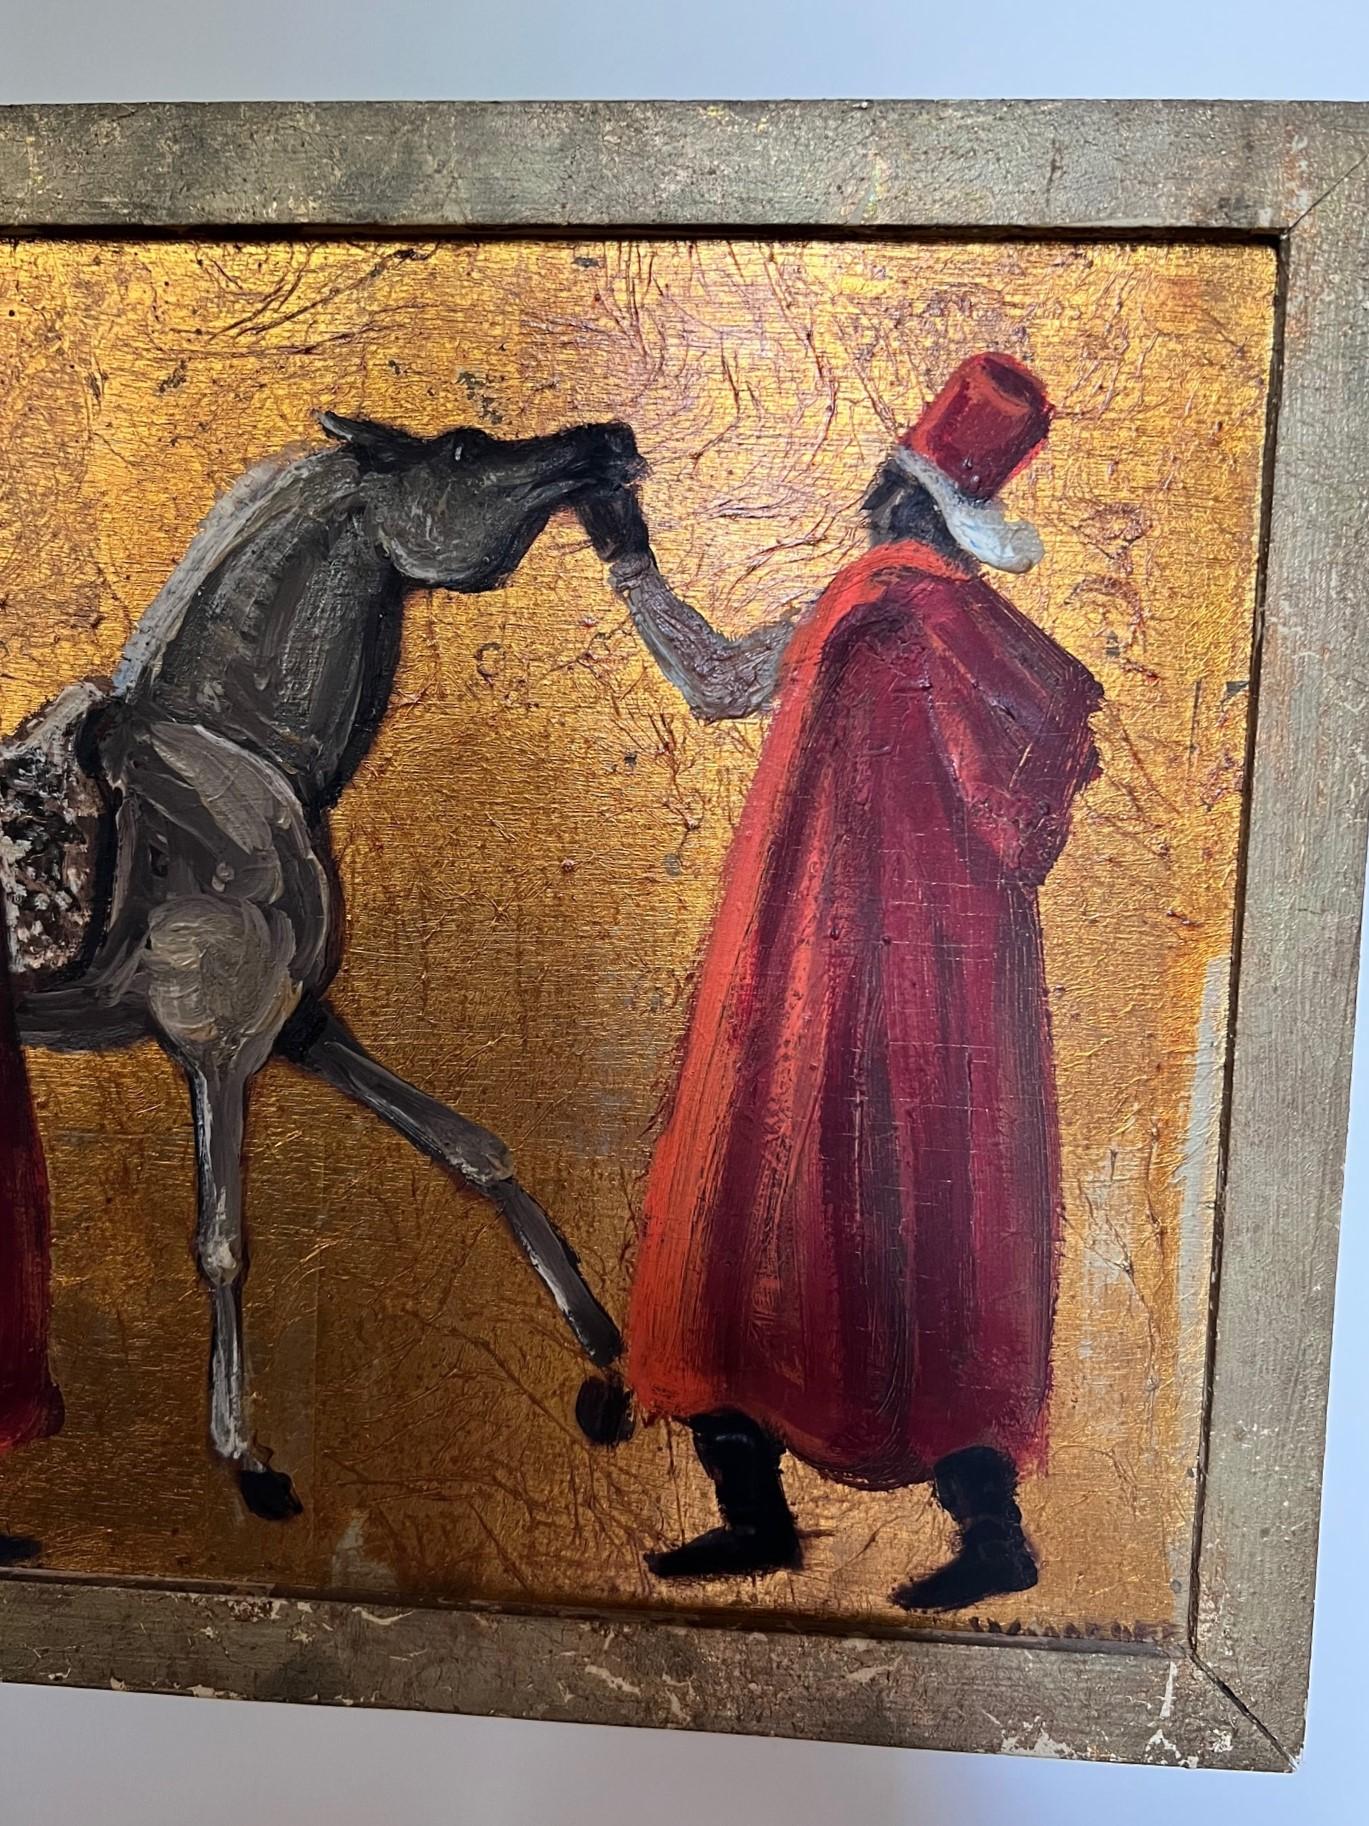 American intra-war artist and illustrator Porter Woodruff (1894-1959). Arabian Horse scene, oil and gold leaf on board with chalky gouache. Signed Woodruff on lower right of painting. Signature somewhat obscured by frame.

His Art Deco-influenced